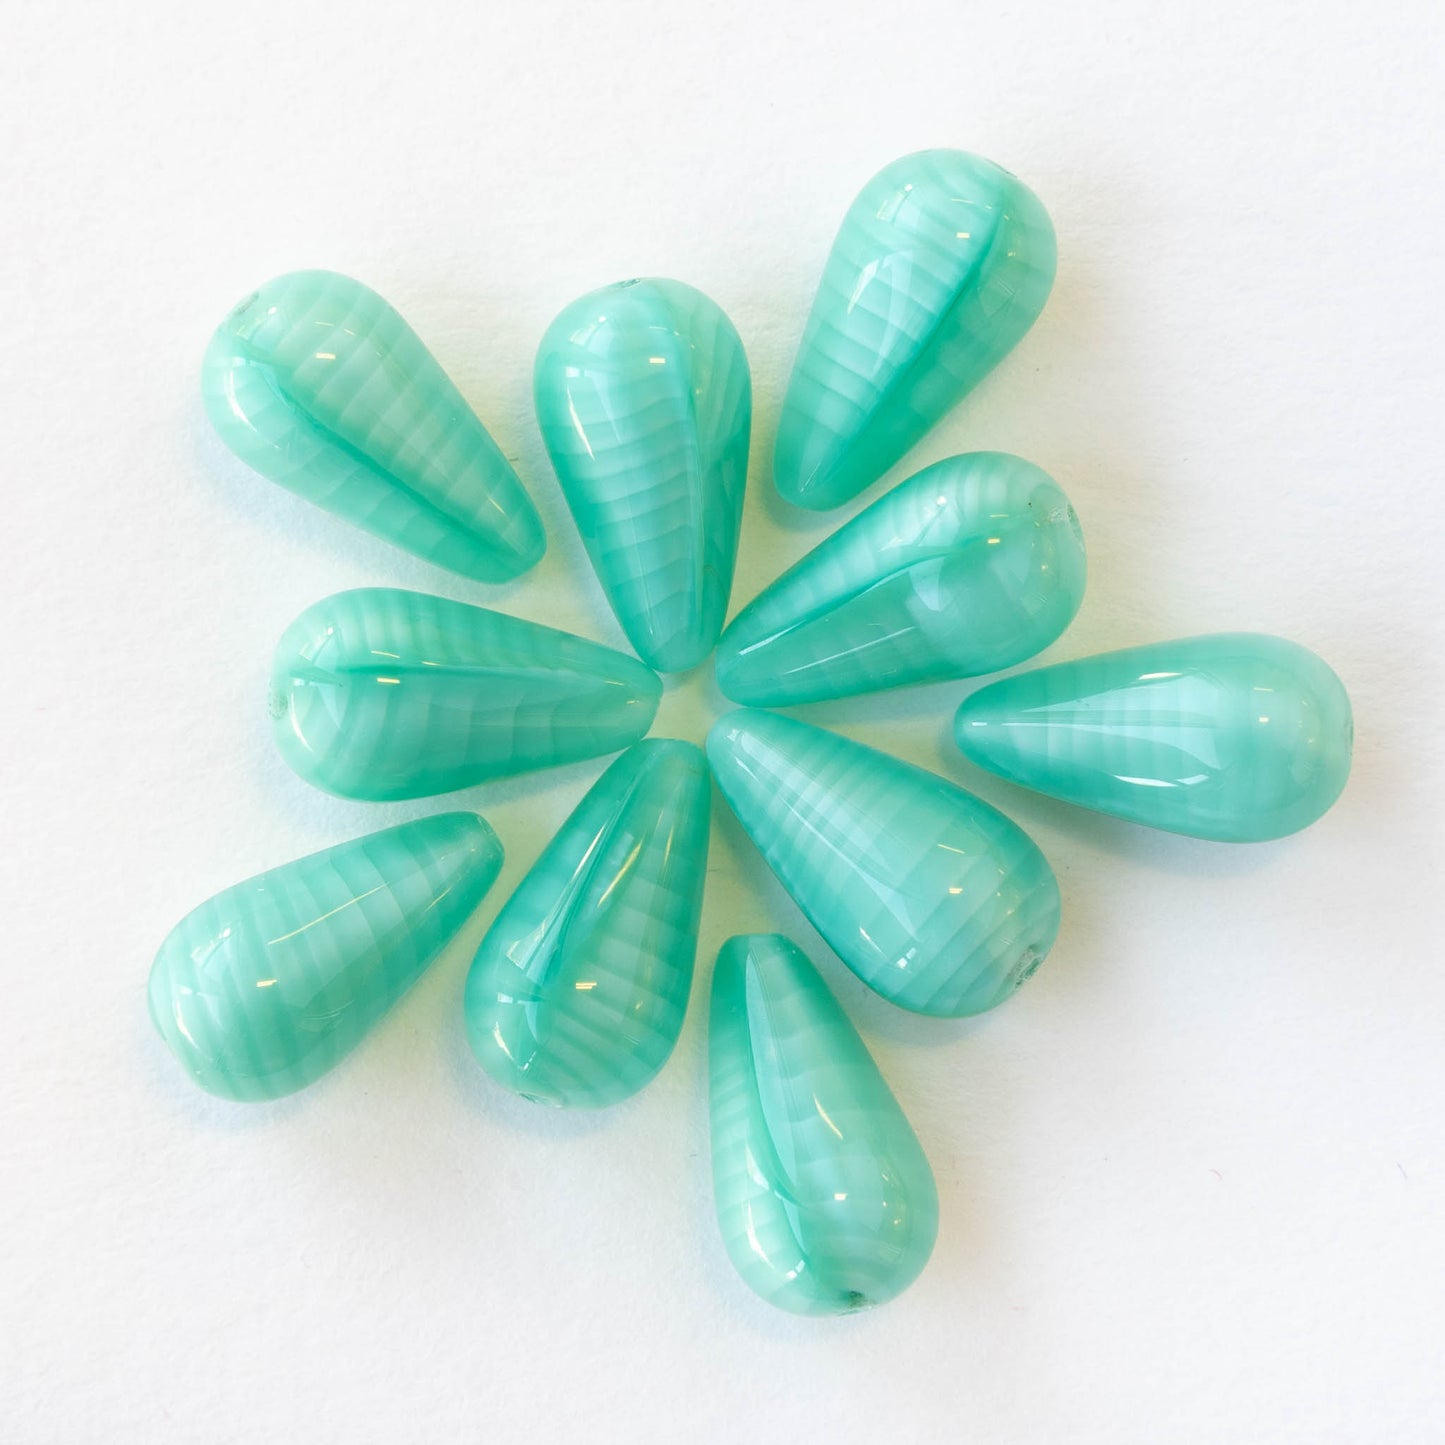 10x20mm Long Drilled Drops - Silky Seafoam - 6 or 12 beads